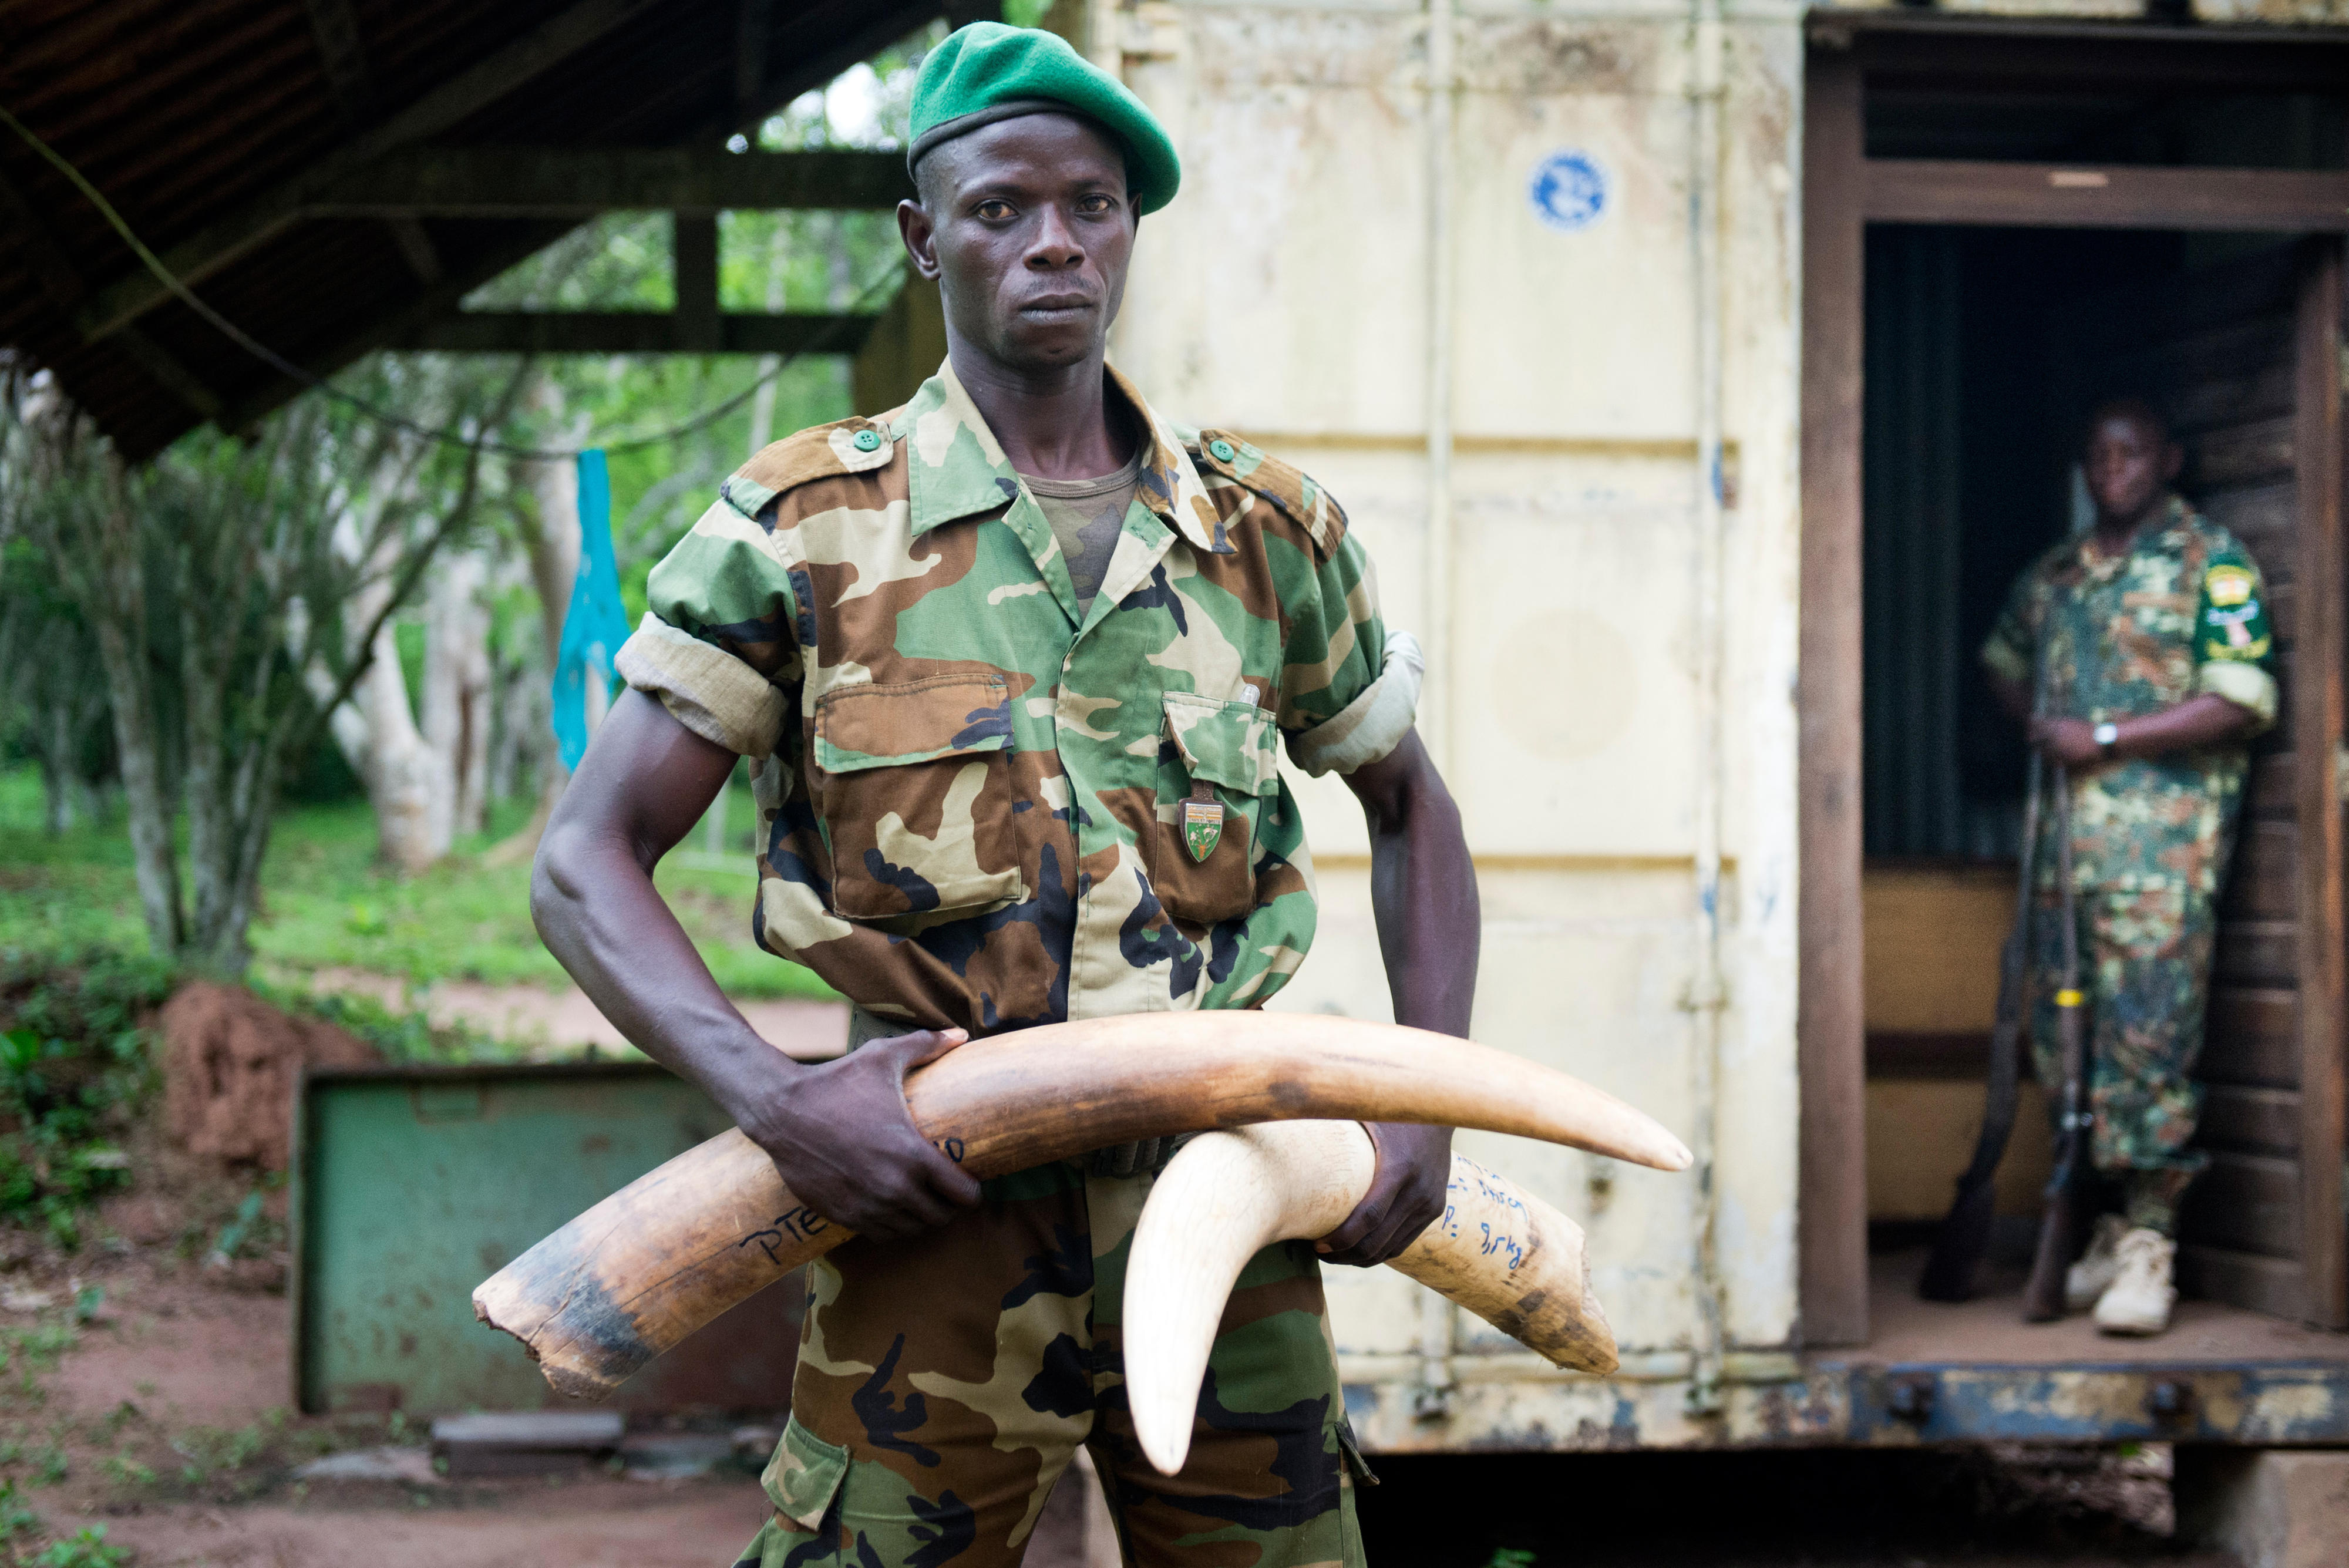 A soldier of the Eco-Guards in the Dzanga National Park in the tri-border region of Congo, Cameroon and Central African Republic shows ivory tusks of forest elephants confiscated from poachers.